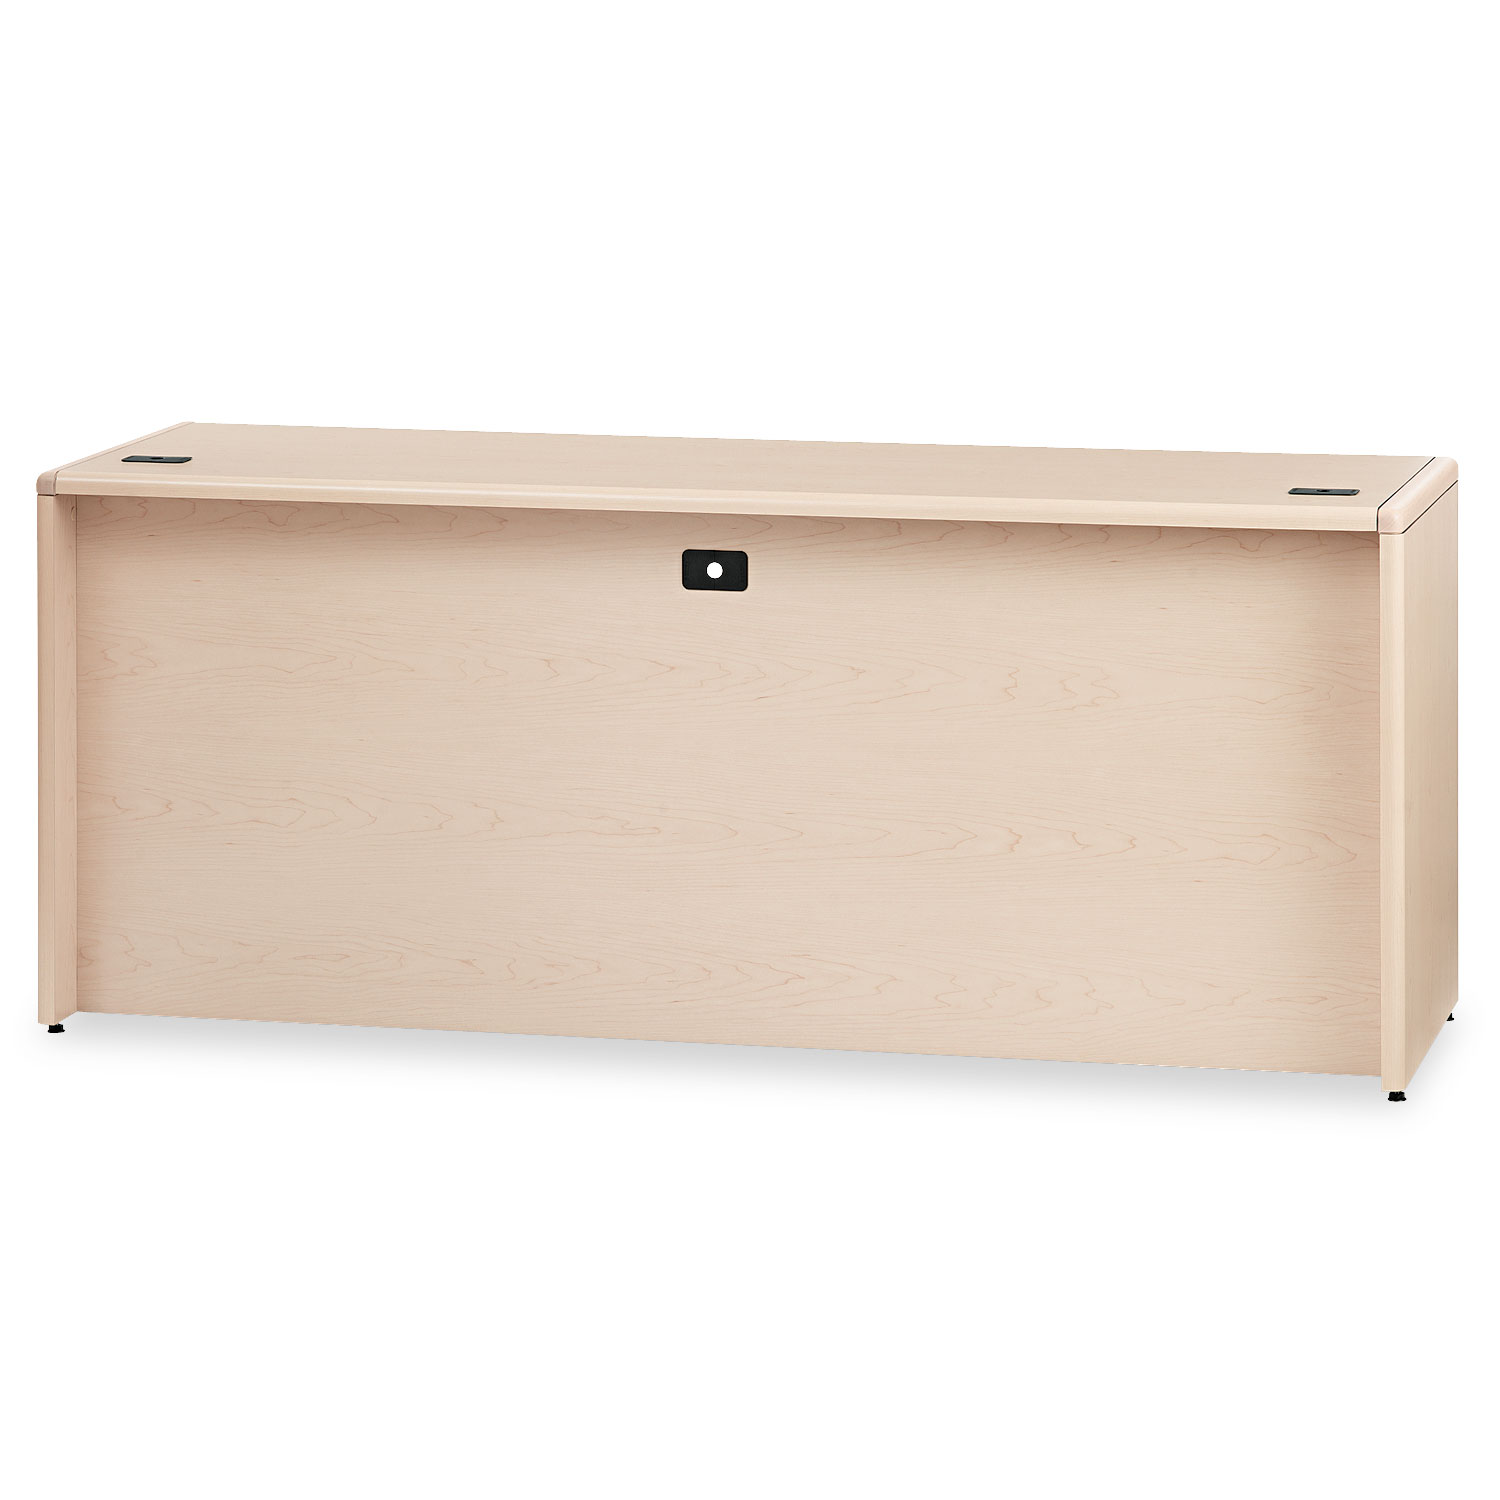 10700 Kneespace Credenza, Full Height Pedestal, 72 x 24 x 29 1/2, Natural Maple